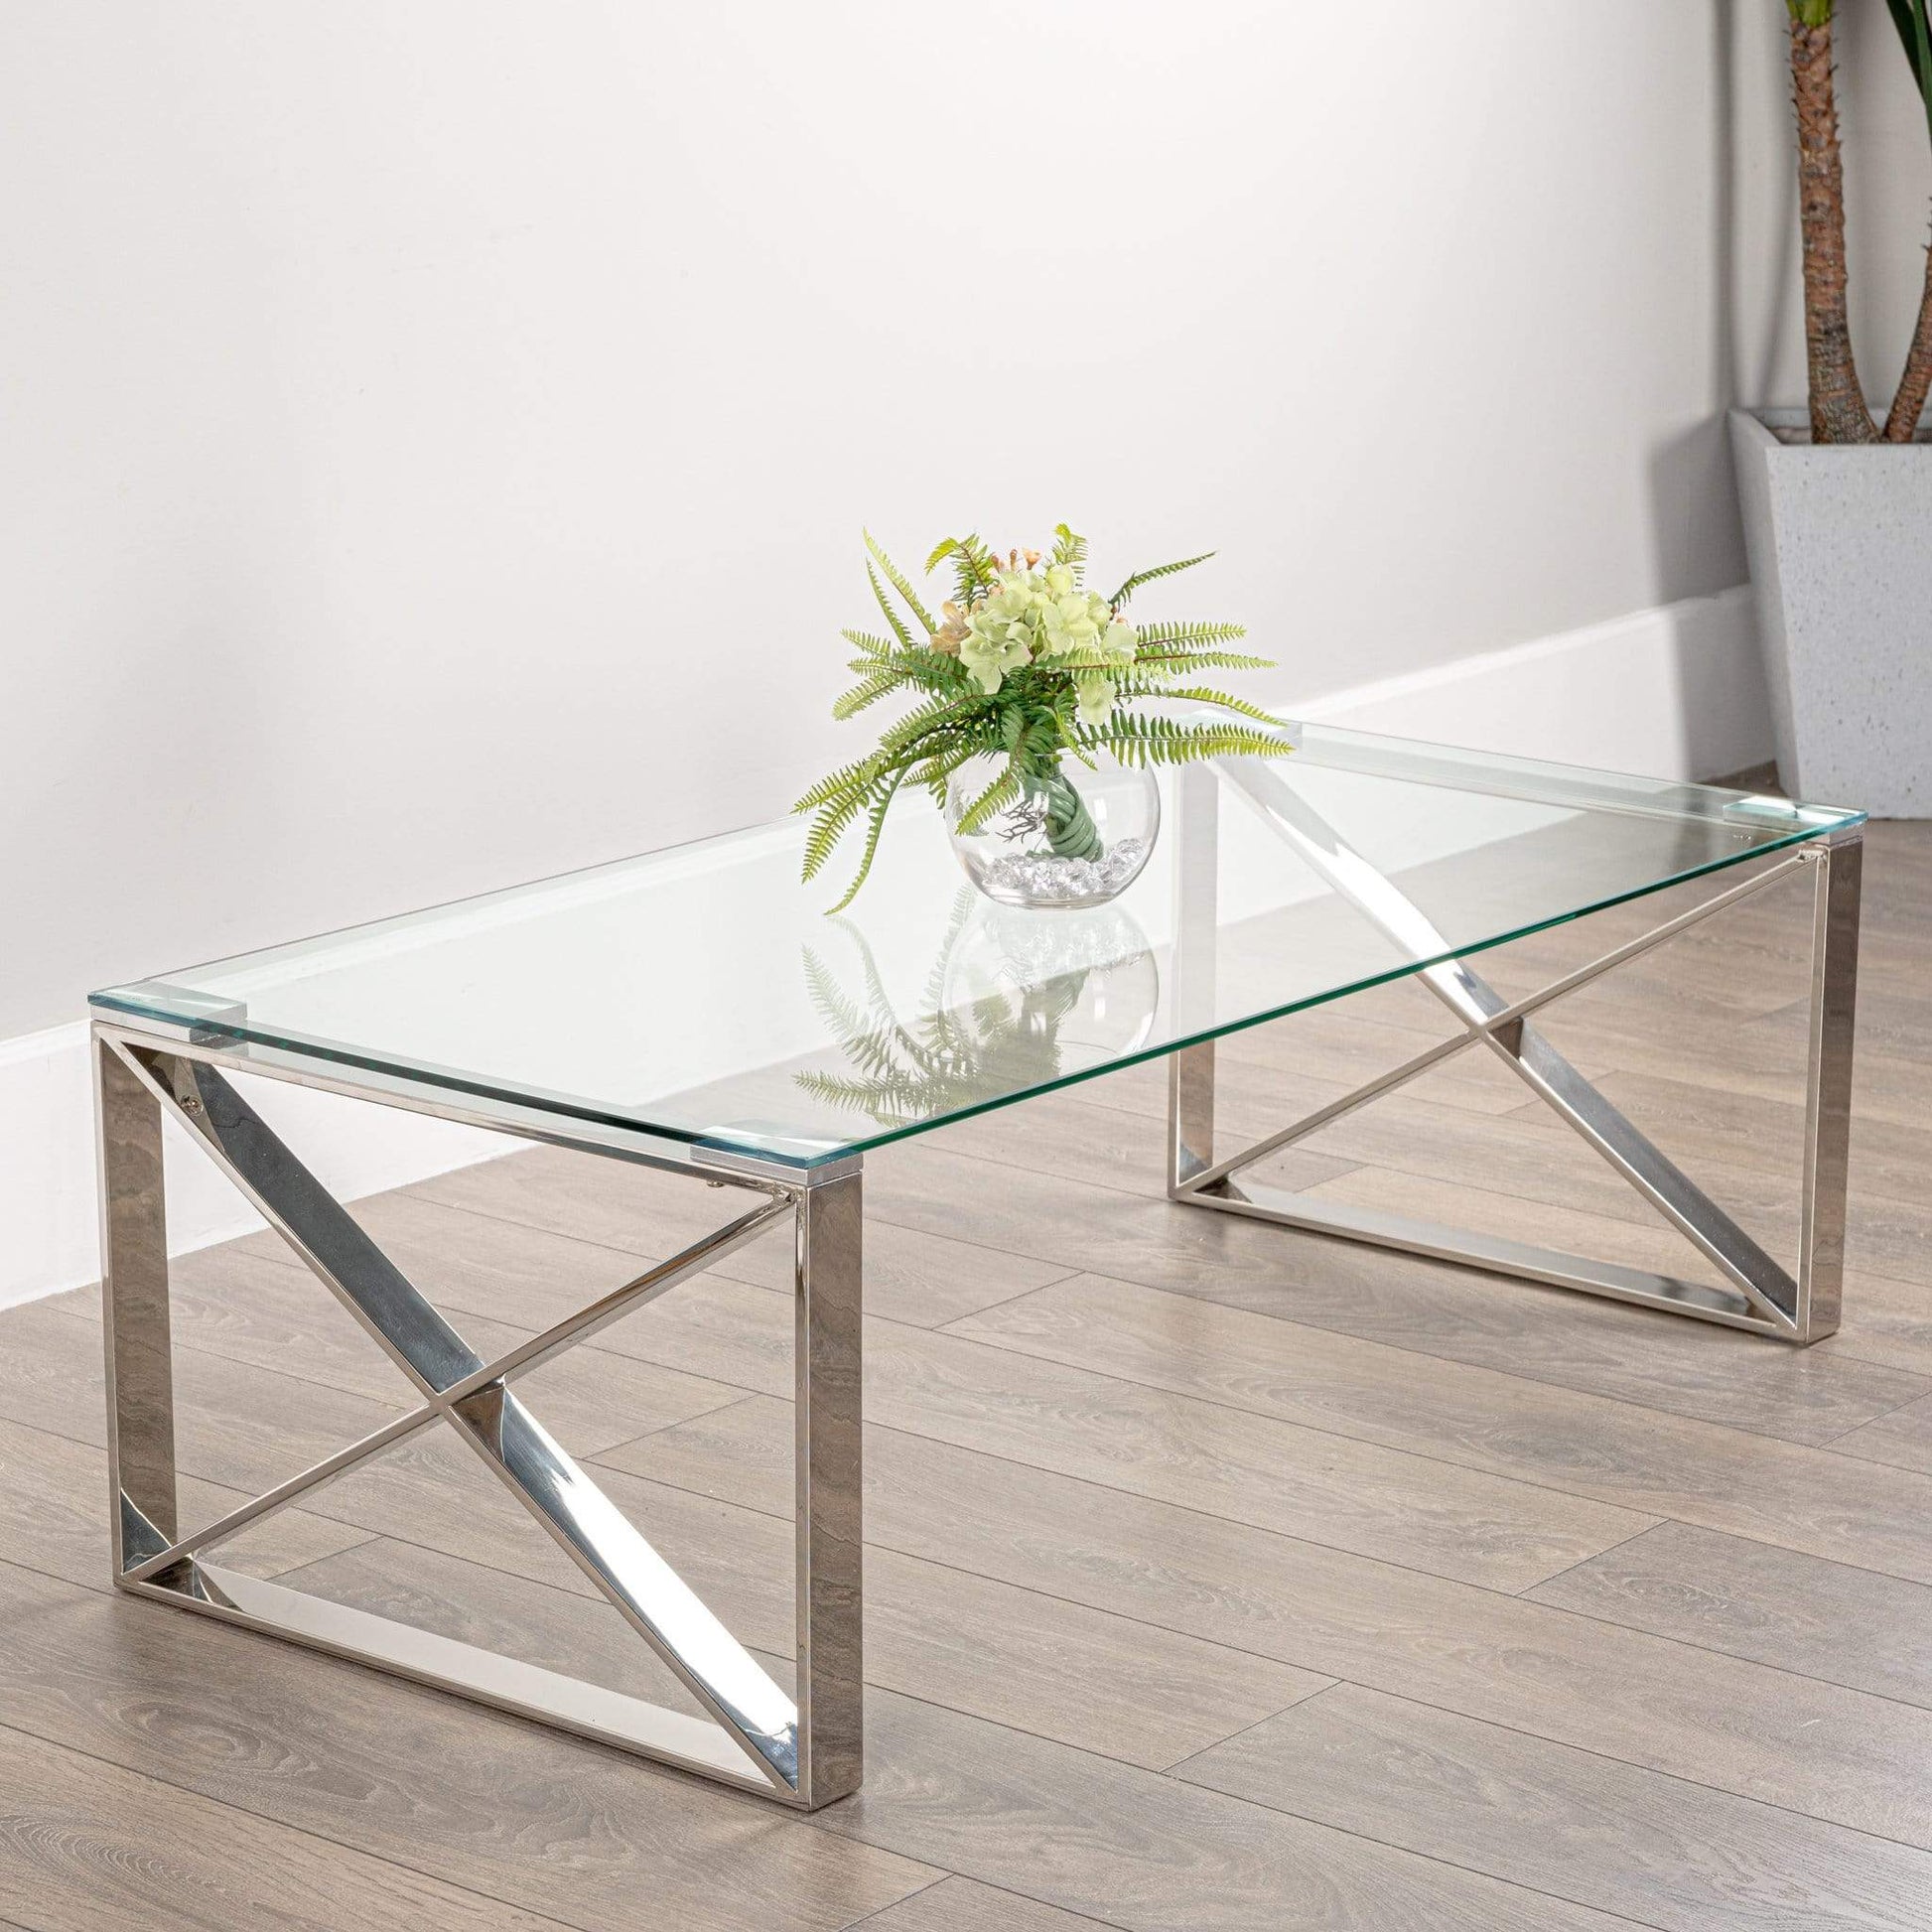 Furniture  -  New York Stainless Steel Coffee Table  -  50152285